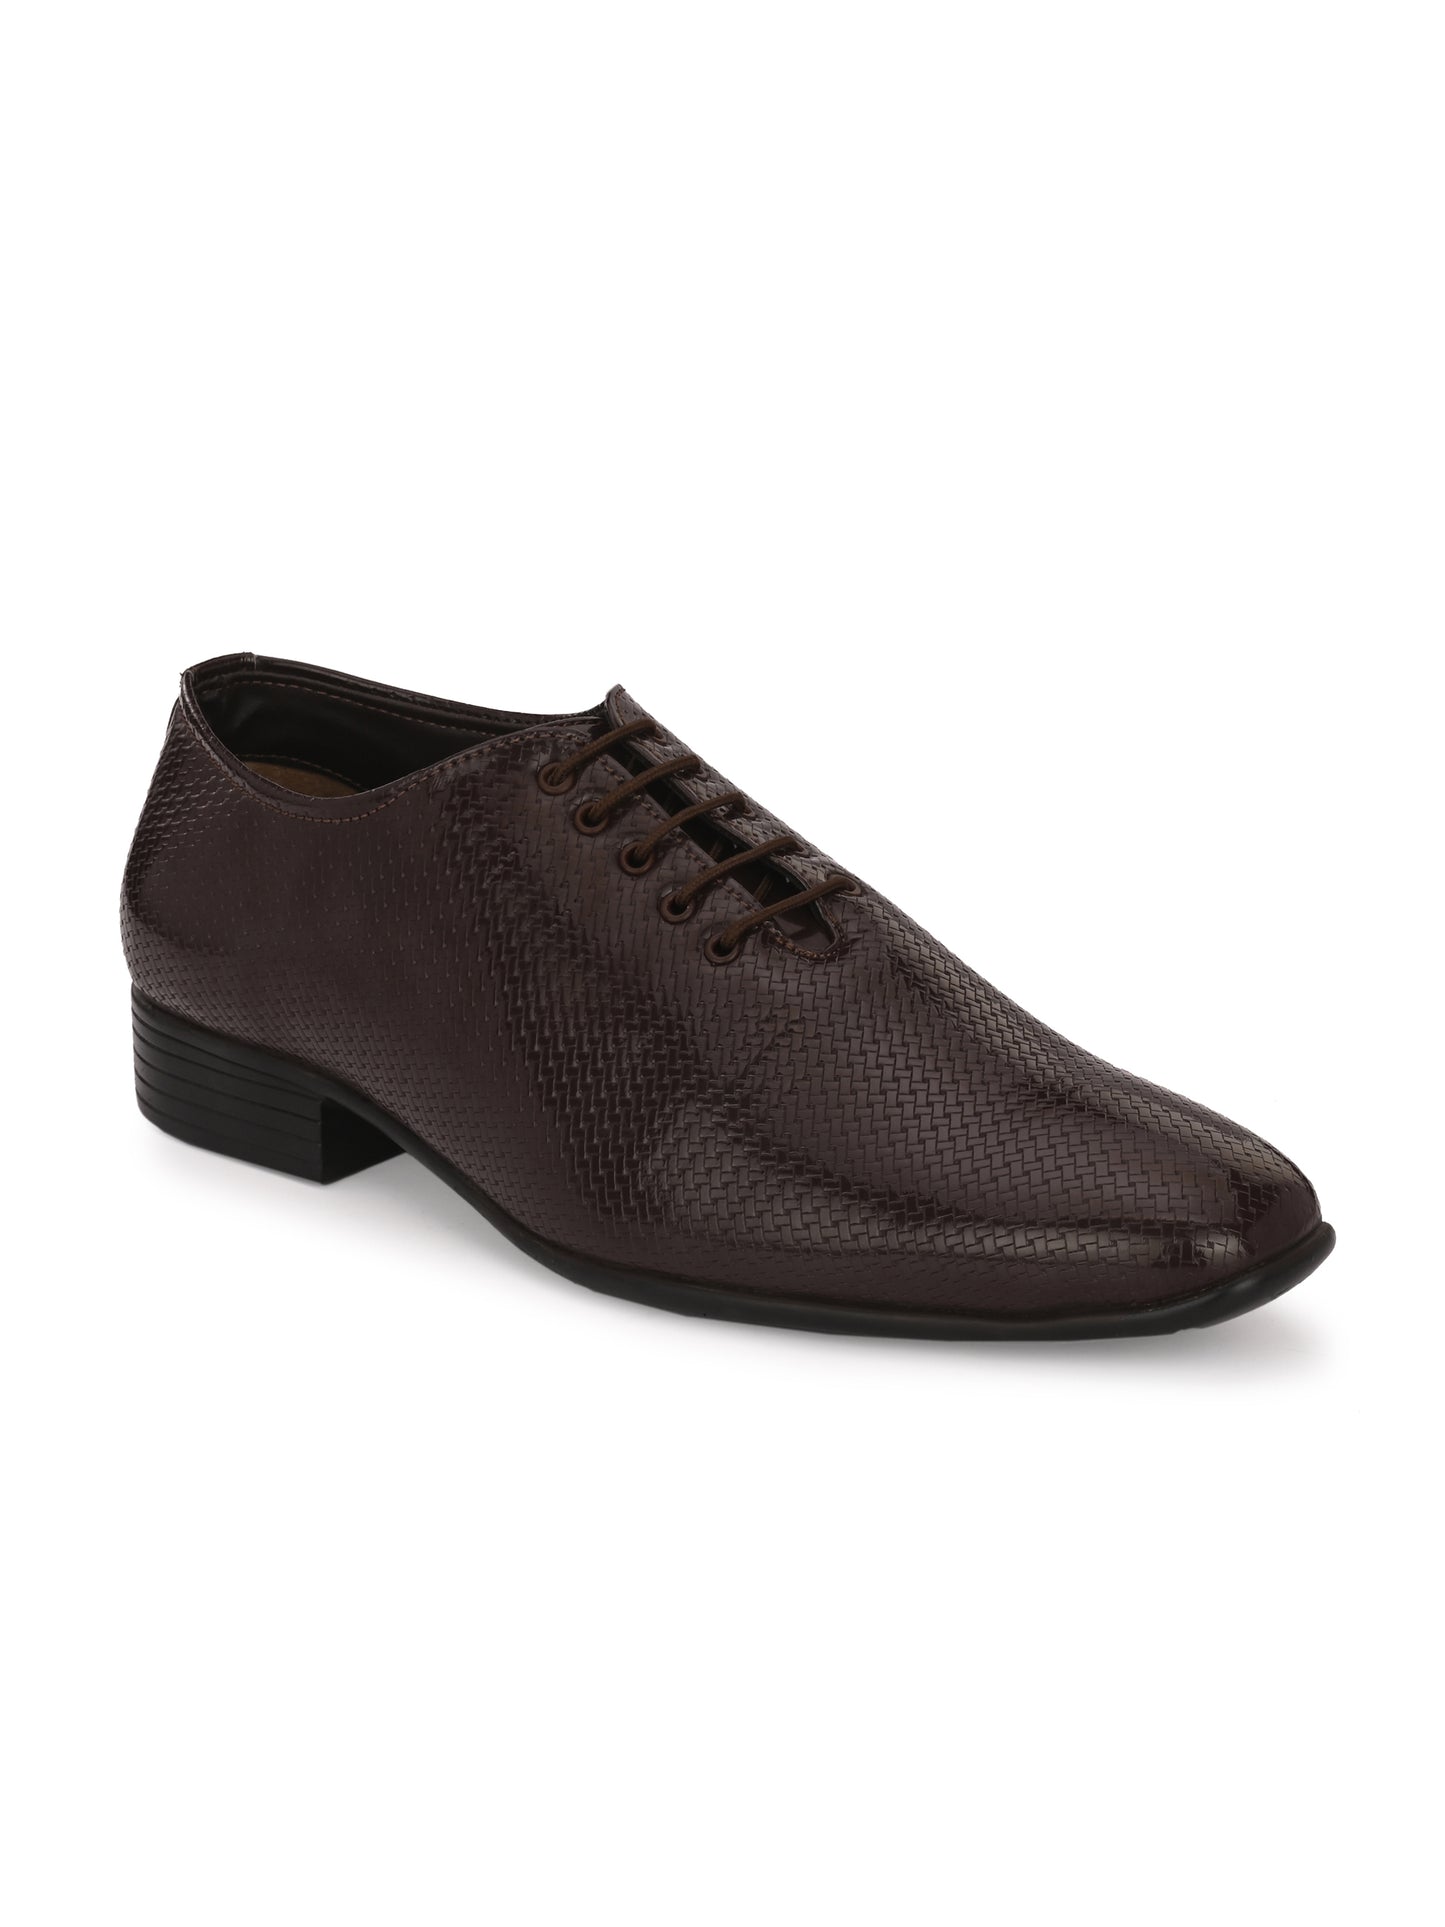 Guava Men's Brown Textured Onecut Lace Up Formal Shoes (GV15JA838)